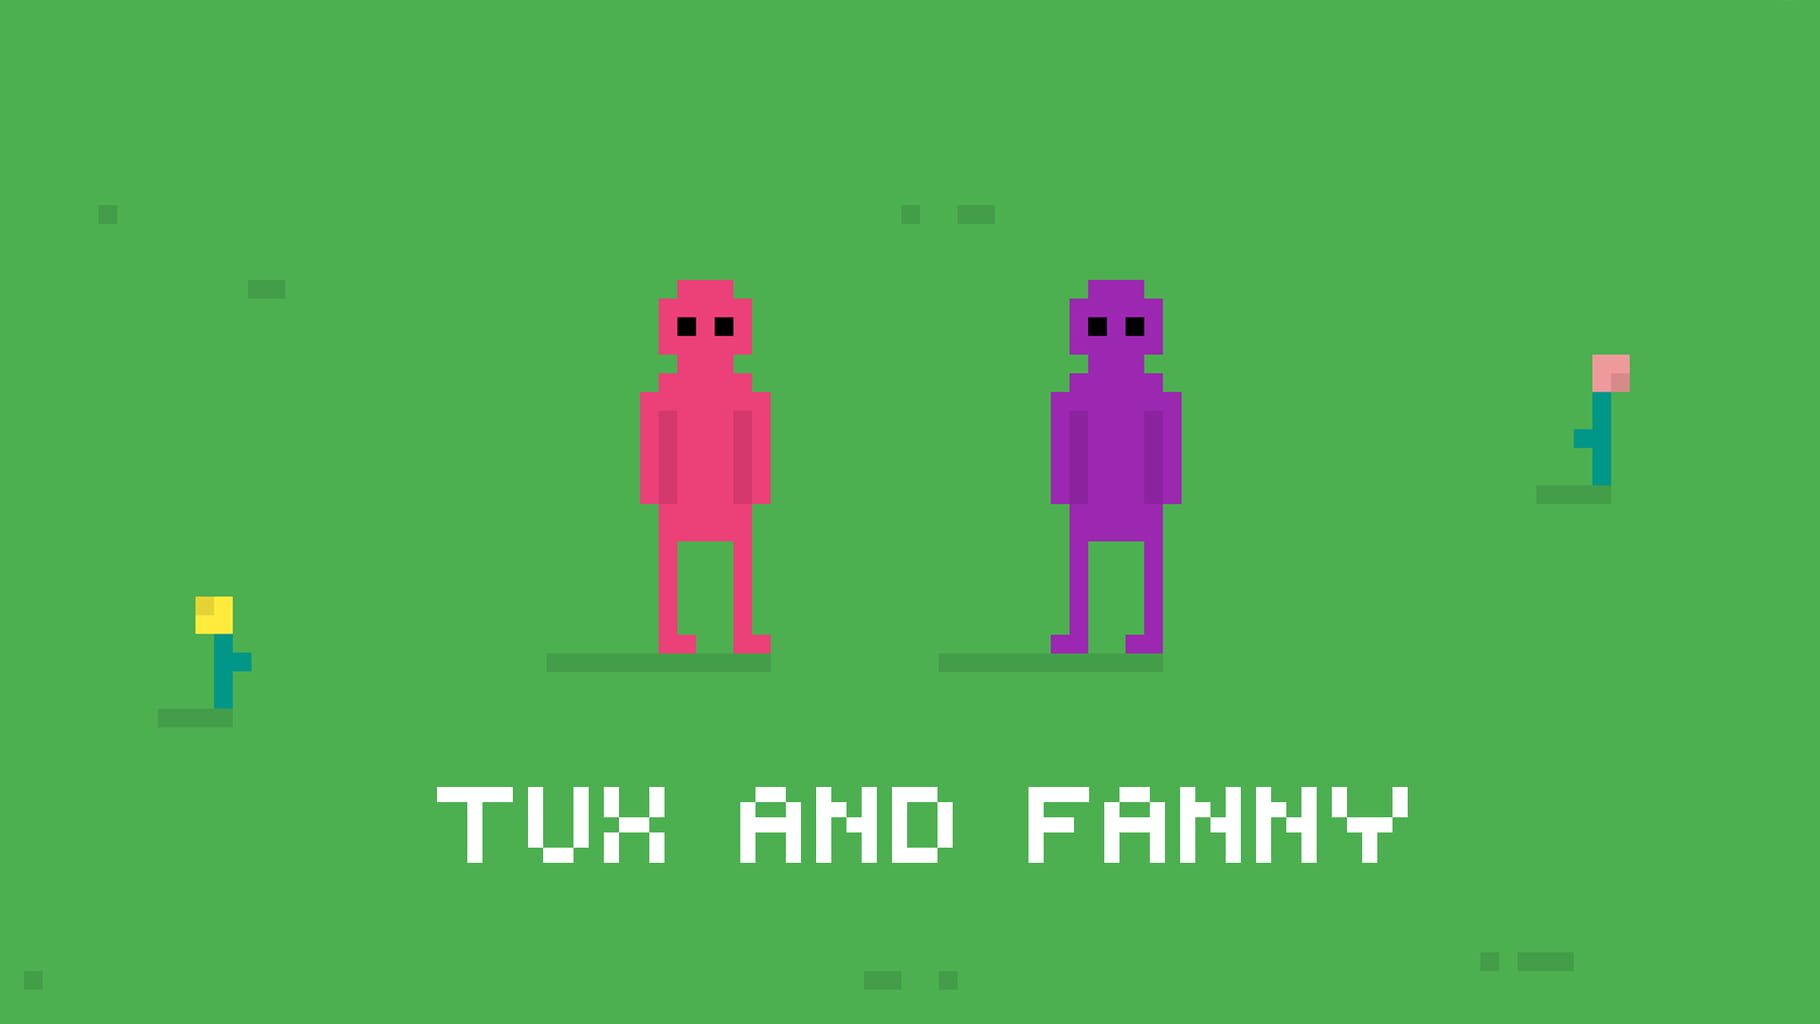 Tux and Fanny artwork